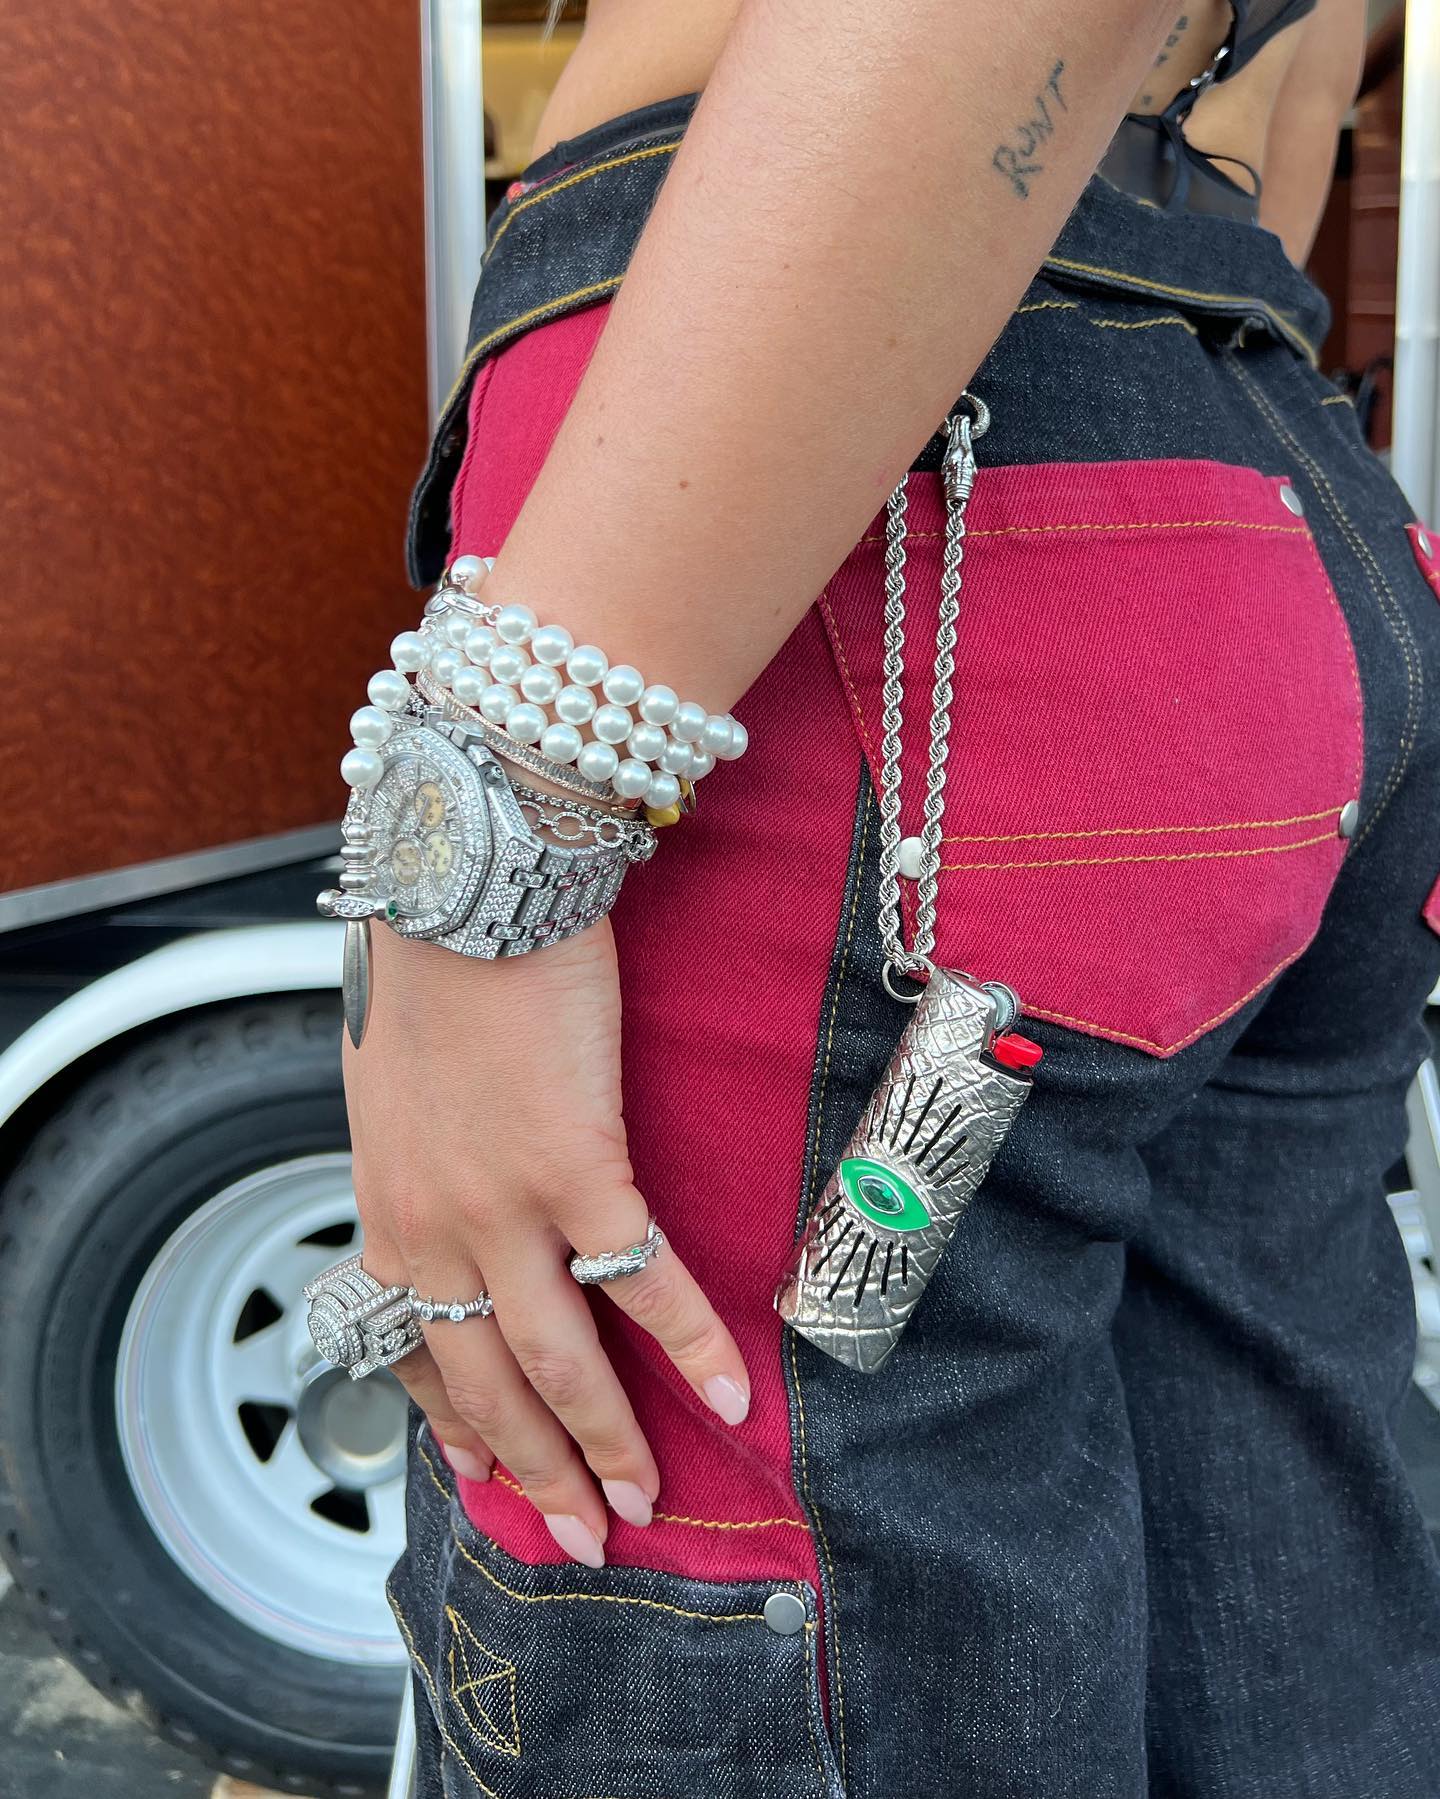 Bella Thorne?s Brings the Bling! - Photo 6